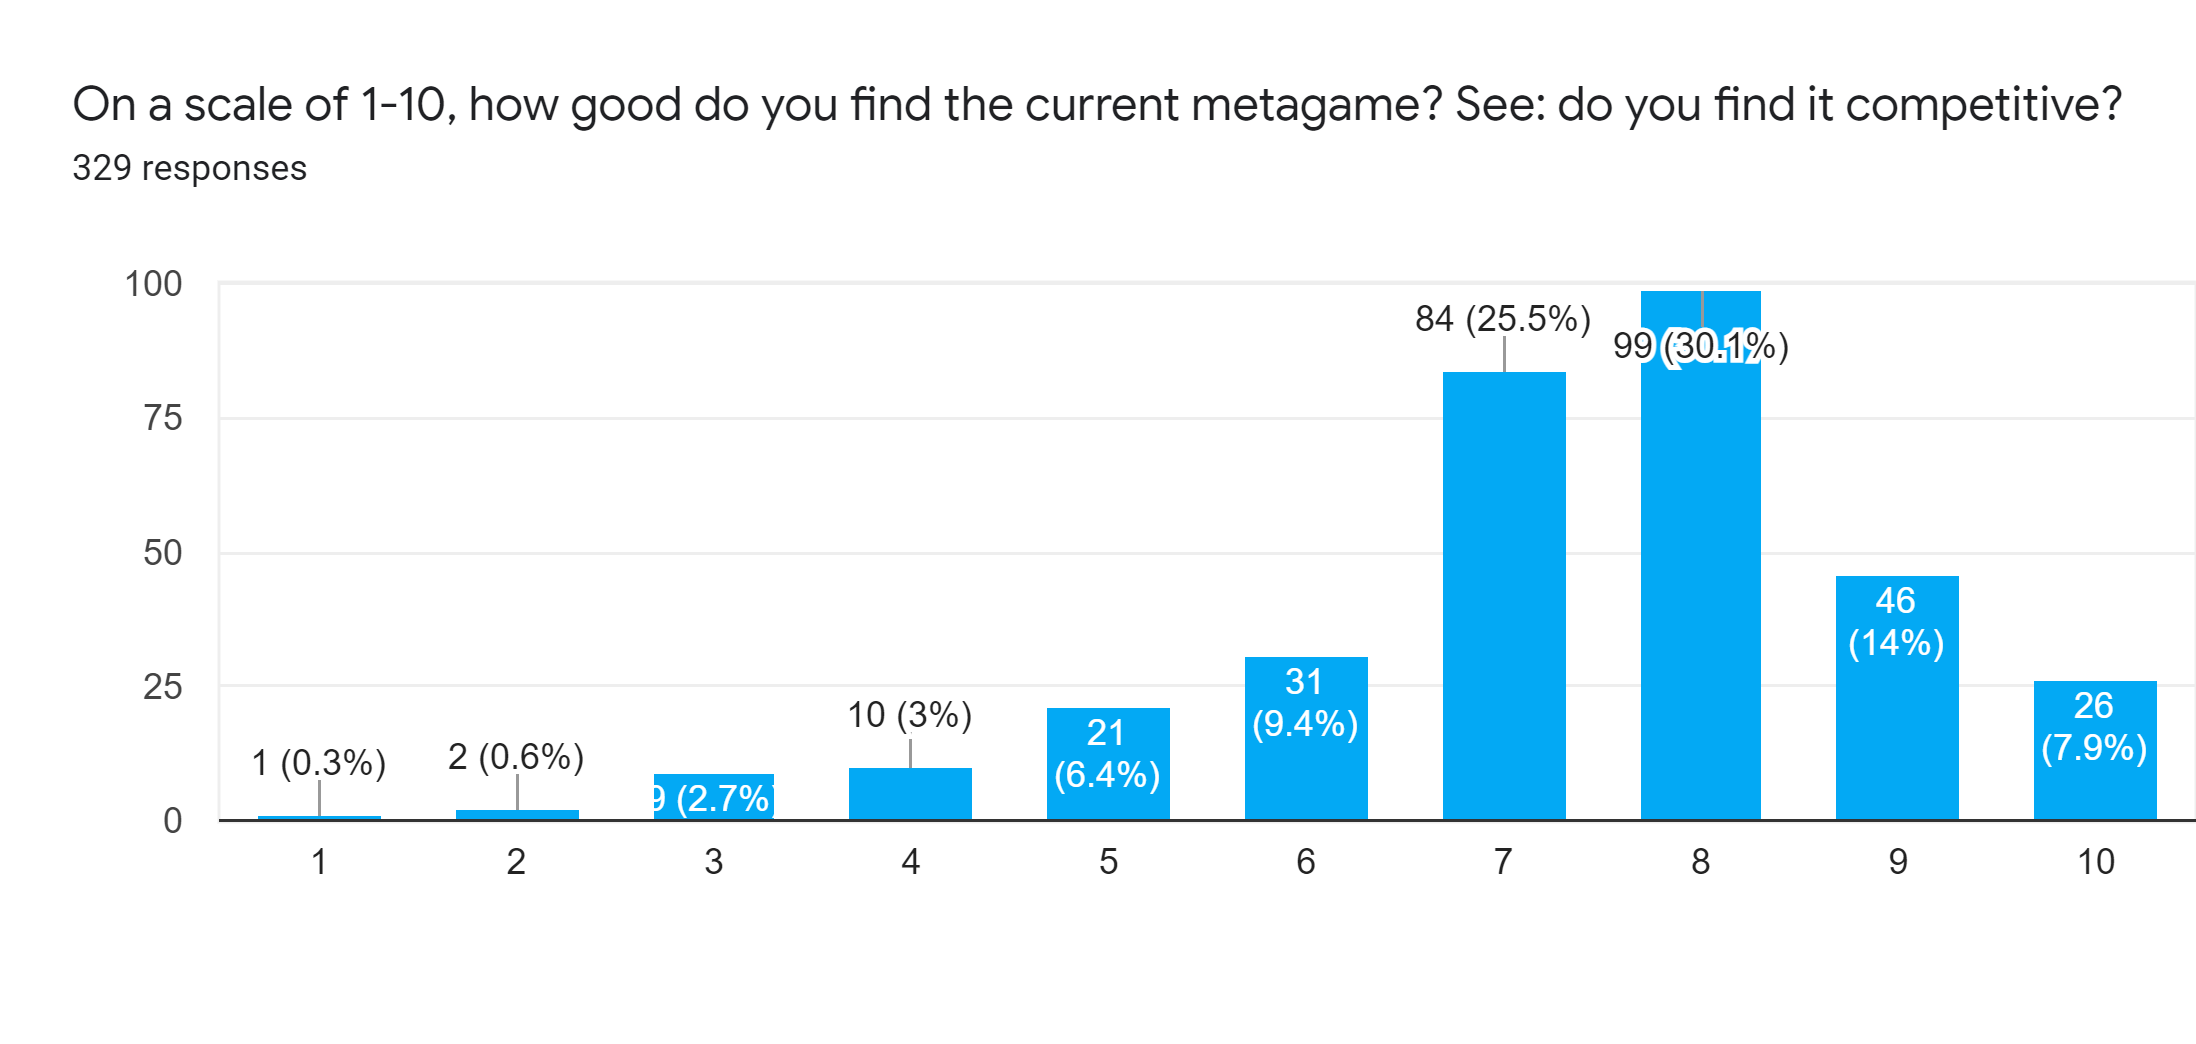 Forms response chart. Question title: On a scale of 1-10, how good do you find the current metagame? See: do you find it competitive?. Number of responses: 329 responses.